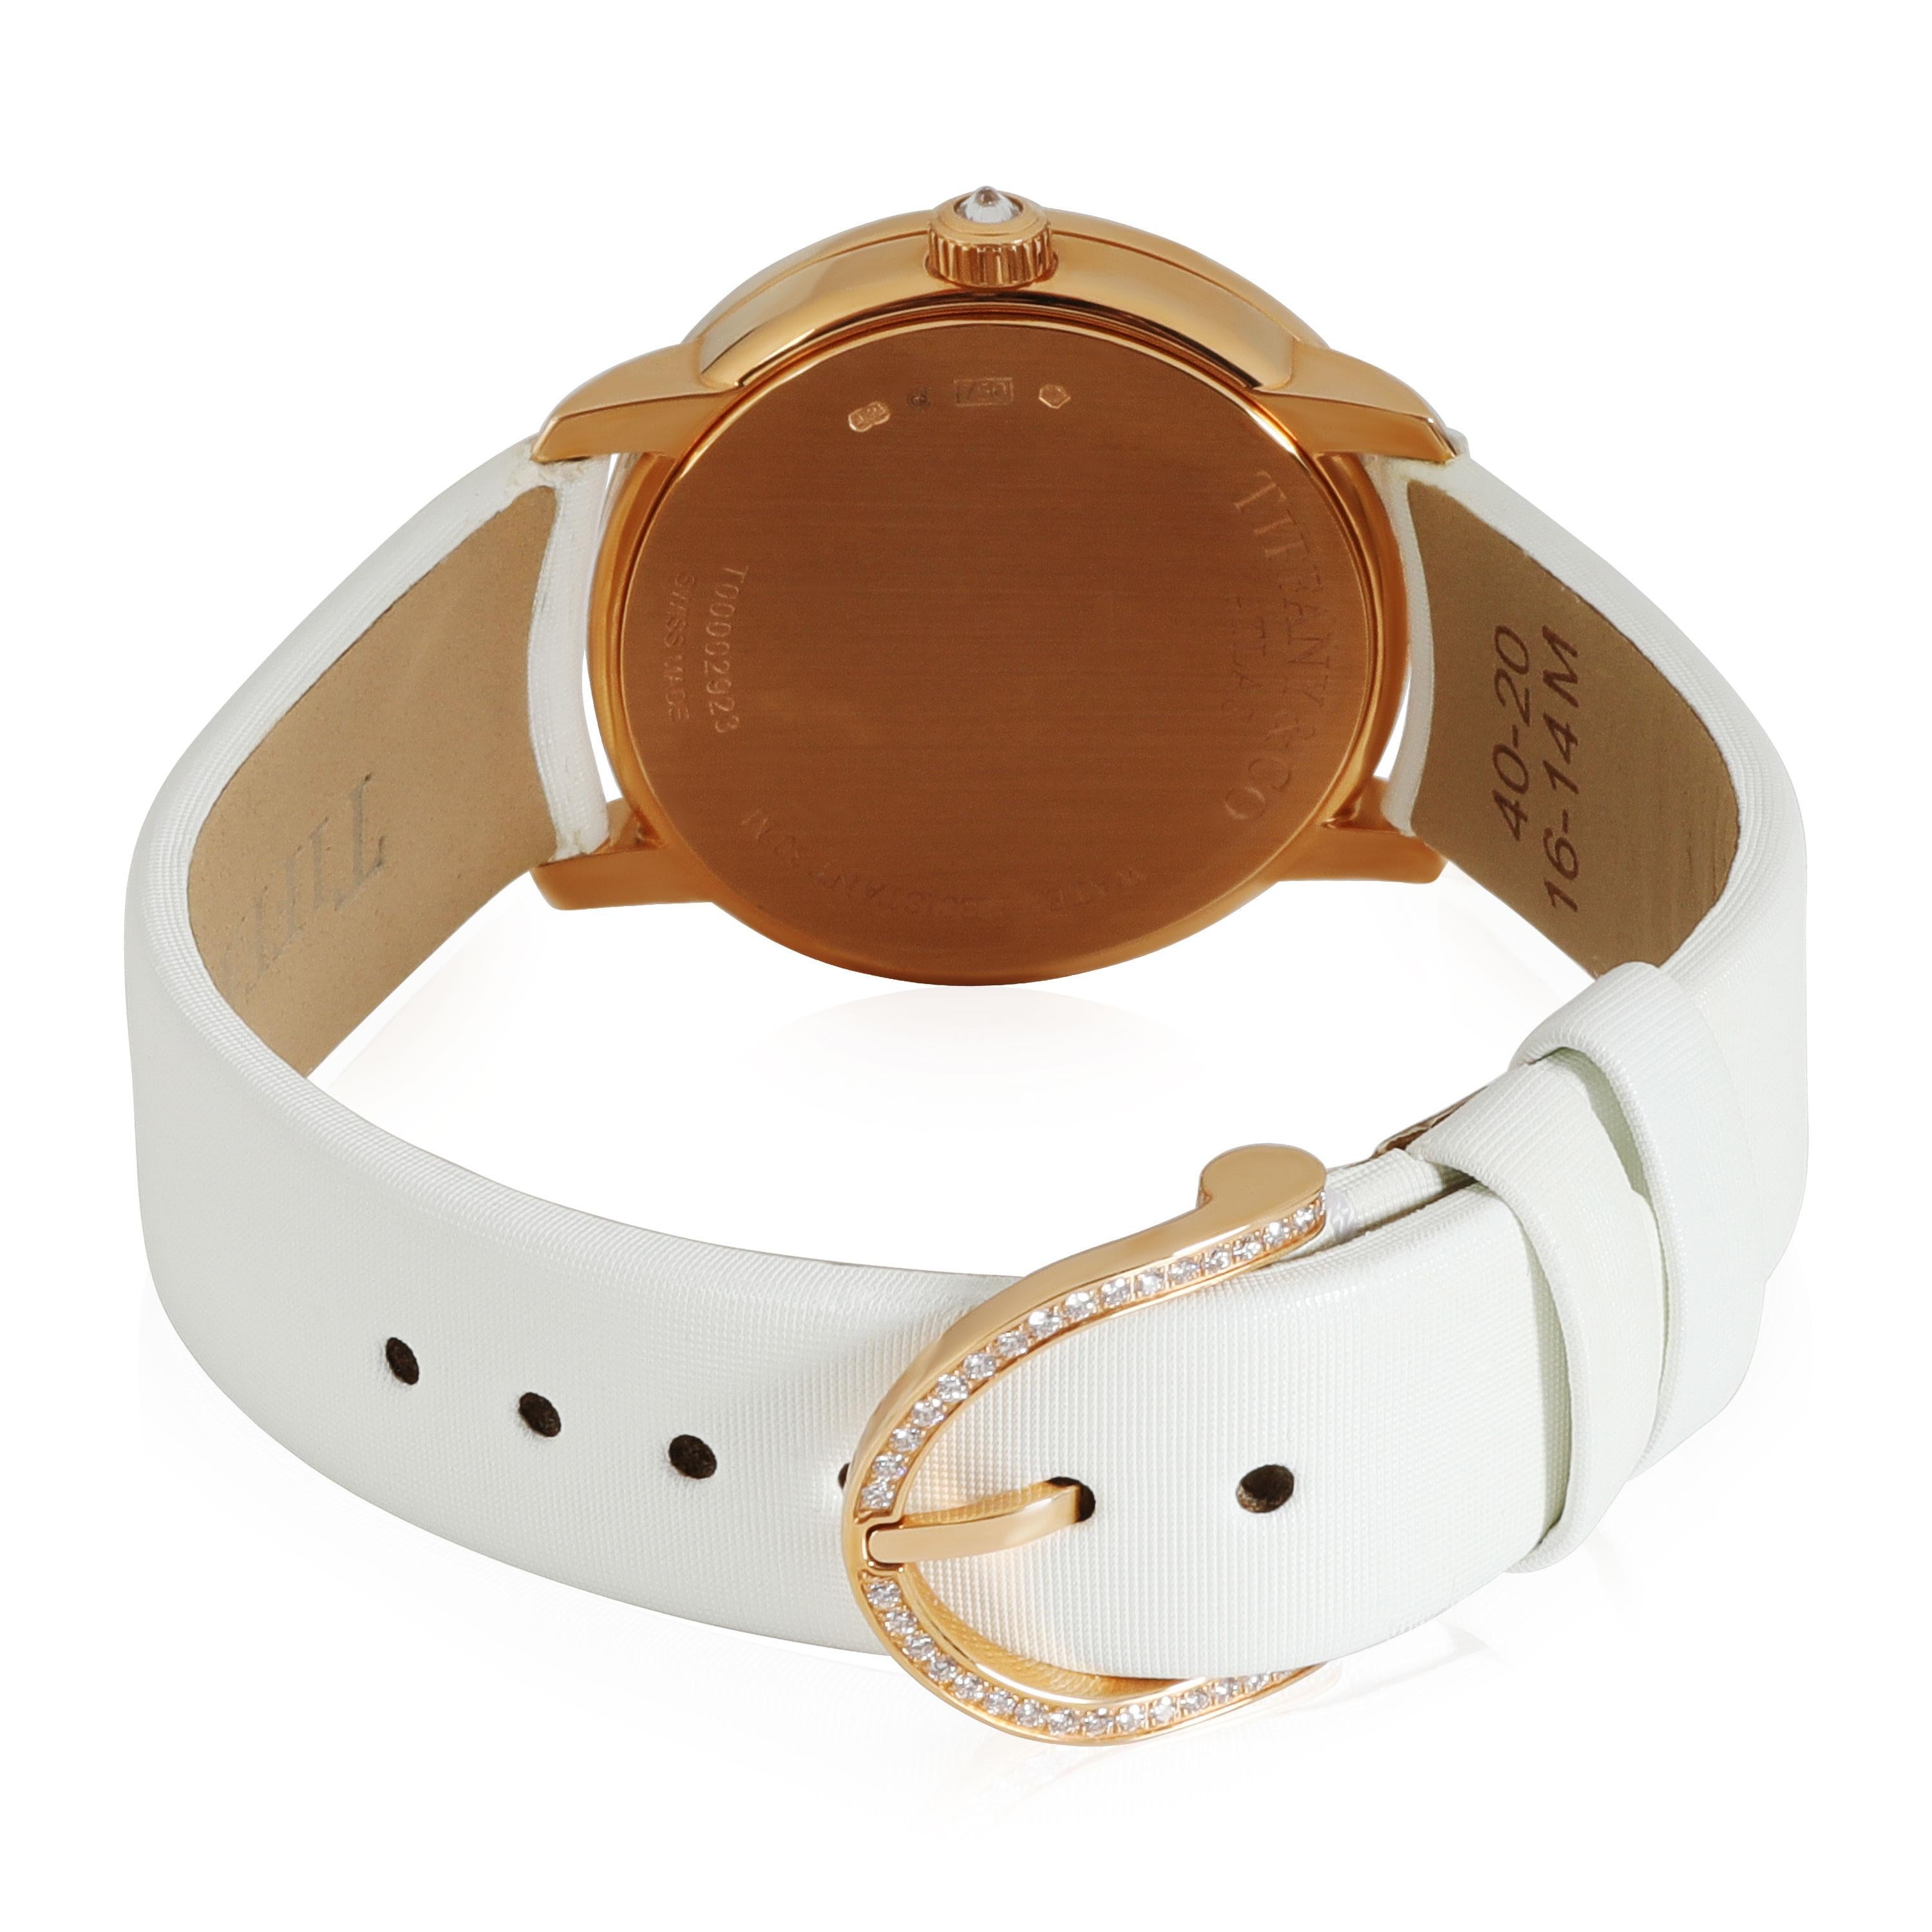 Tiffany & Co. Atlas Cocktail Z1901.10.30E20A40B Women's Watch in 18kt Rose Gold

SKU: 115705

PRIMARY DETAILS
Brand: Tiffany & Co.
Model: Atlas Cocktail
Country of Origin: Switzerland
Movement Type: Quartz: Battery
Year of Manufacture: